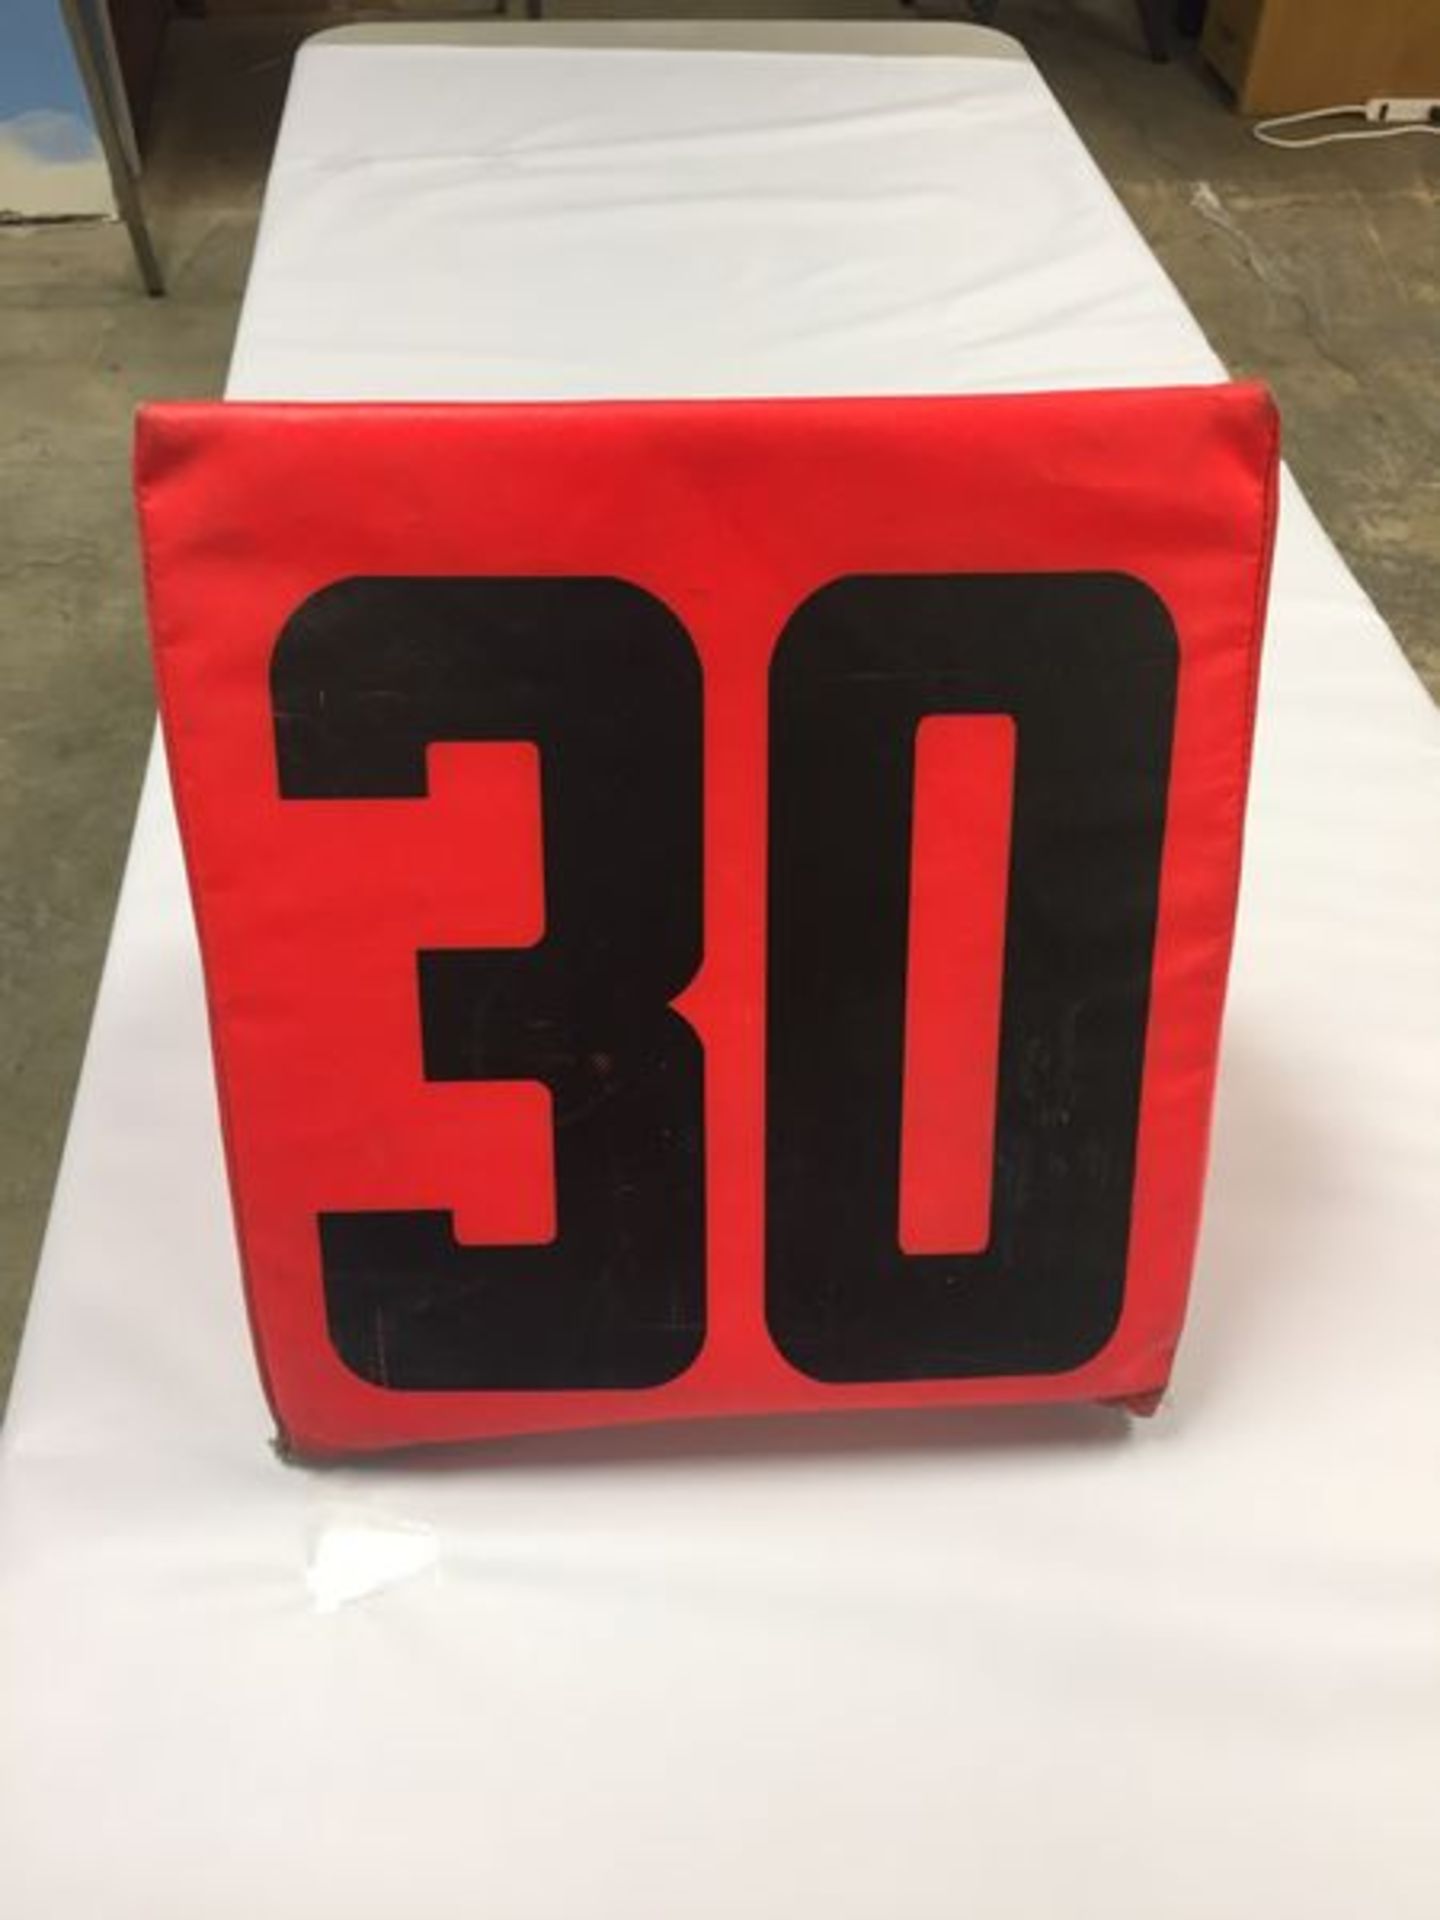 30 yard"" Sideline Marker / Game-Used / This item includes Georgia Dome Authentication Tag